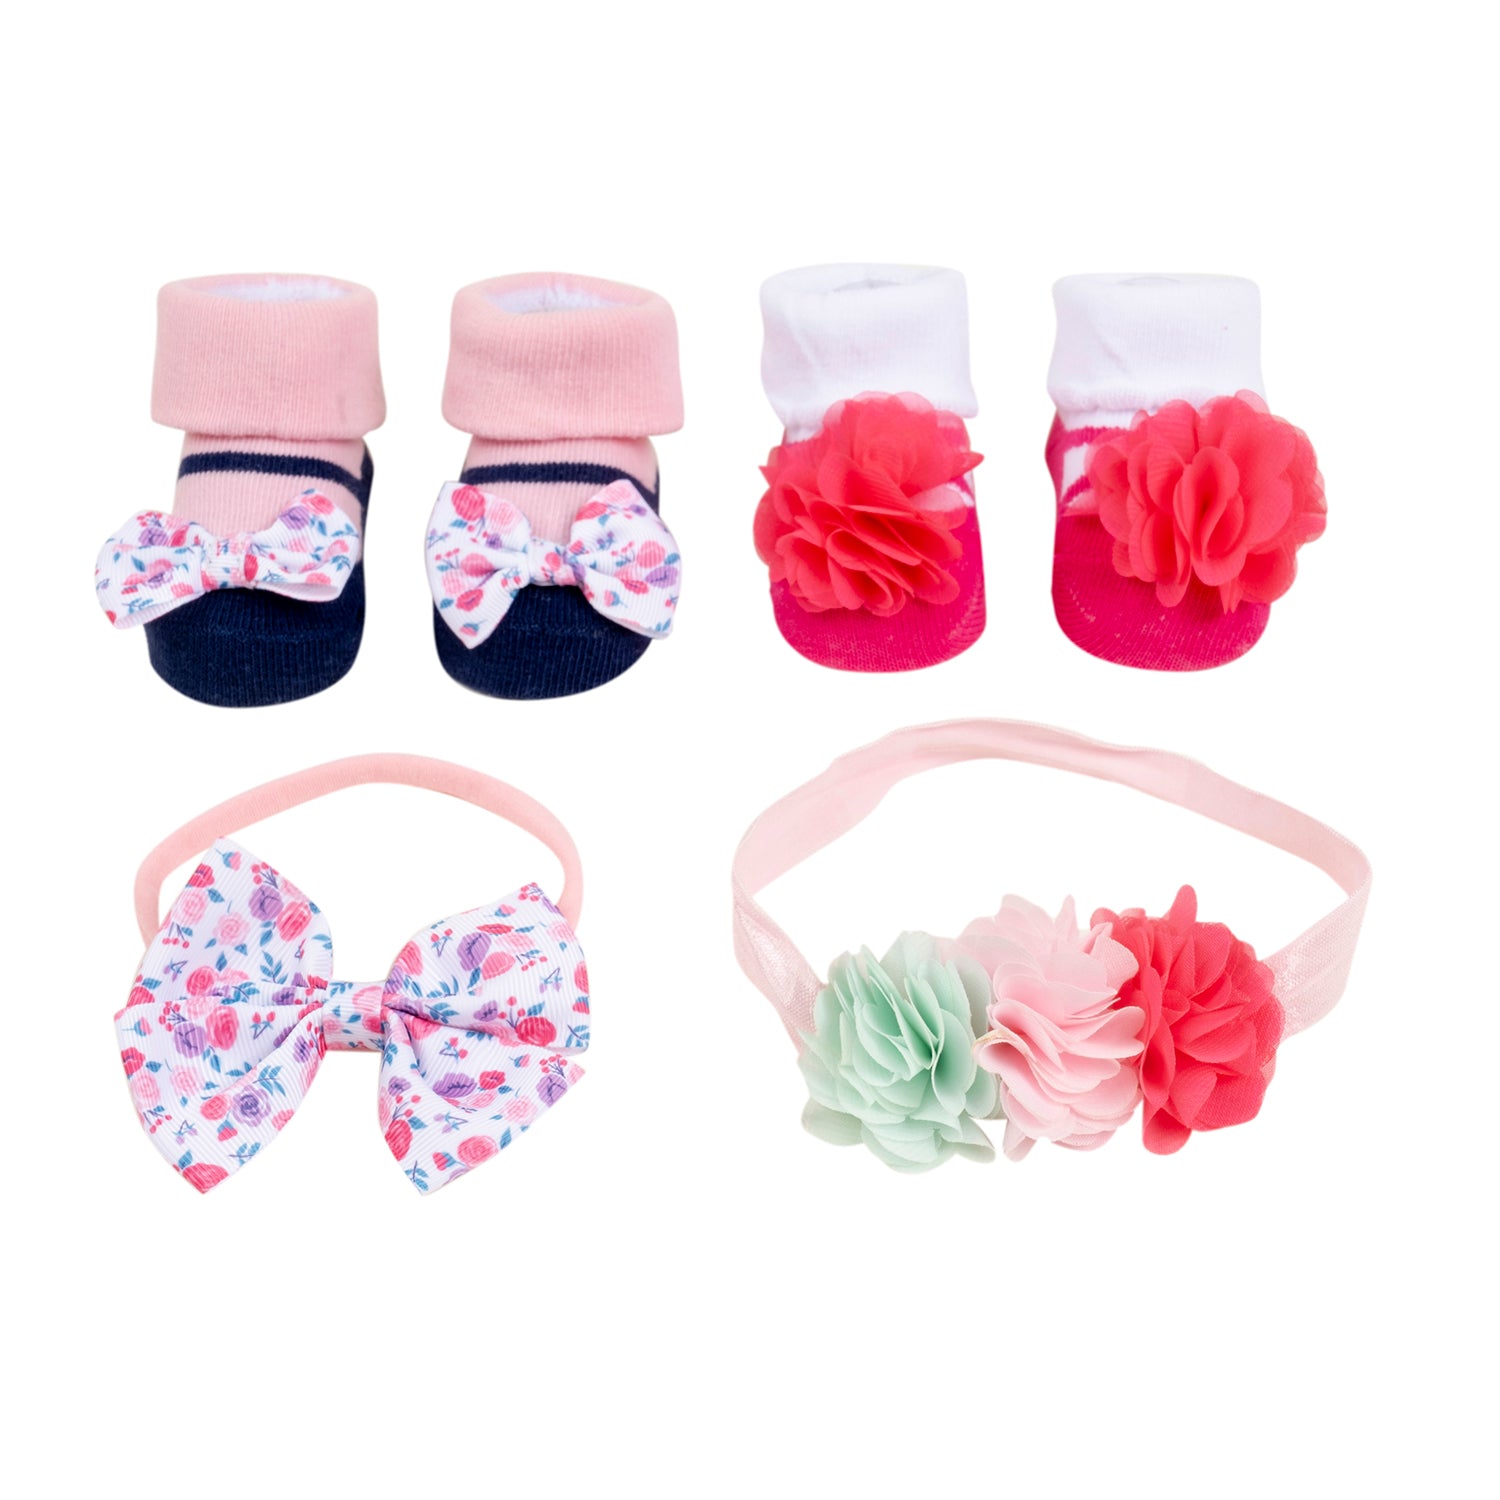 Baby Moo Ring a Ring o' Roses Infant Girl 4-Piece Gift Hairband And Socks Set - Pink